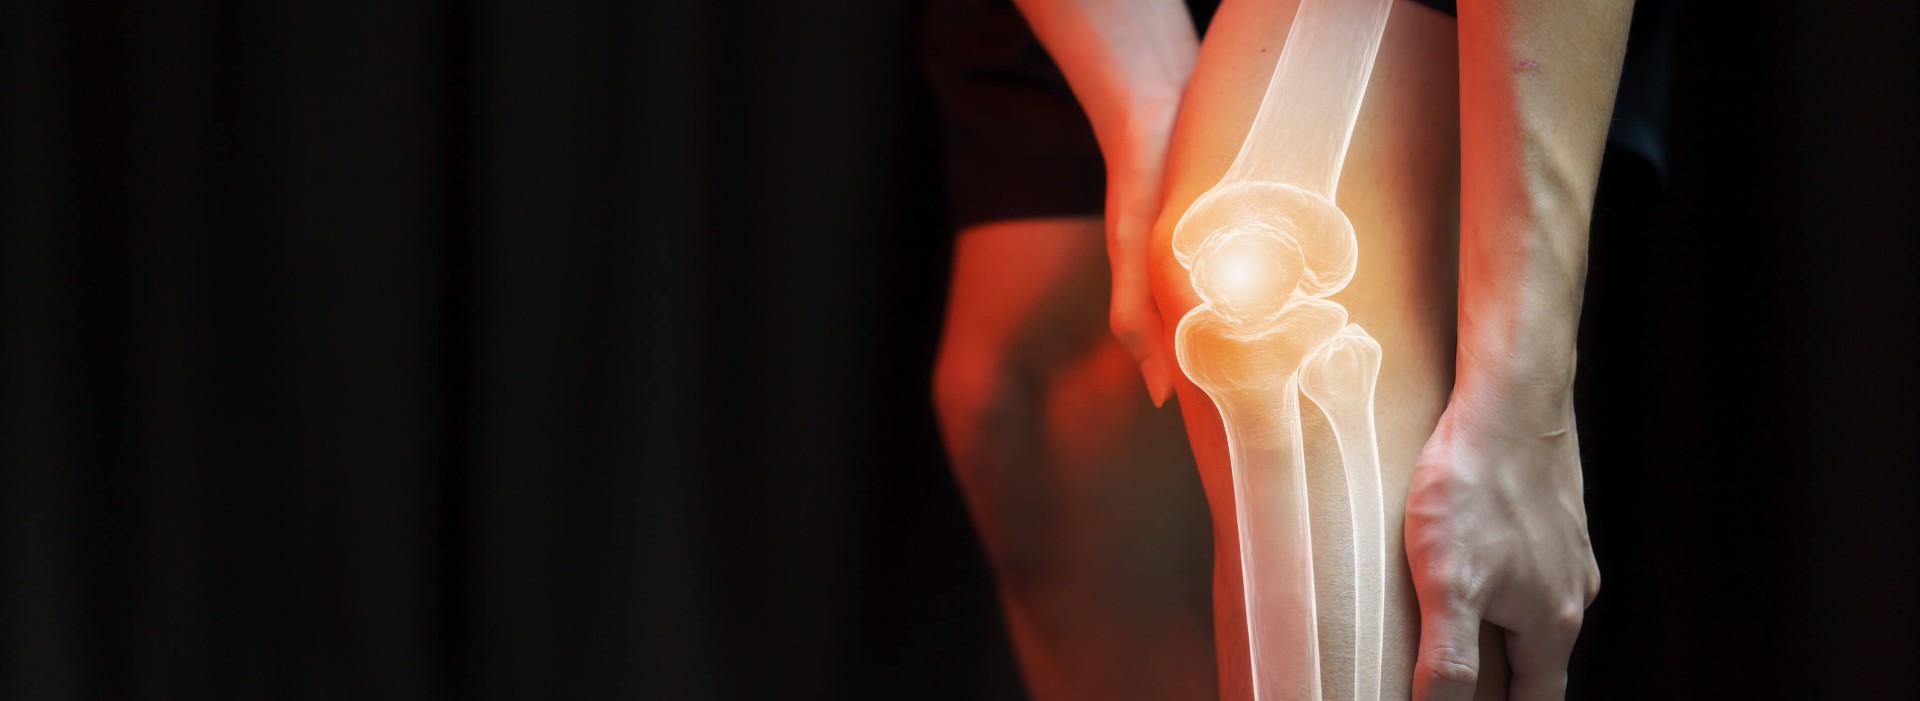 ACL Surgery | An Orthopaedic Surgeon’s Guide